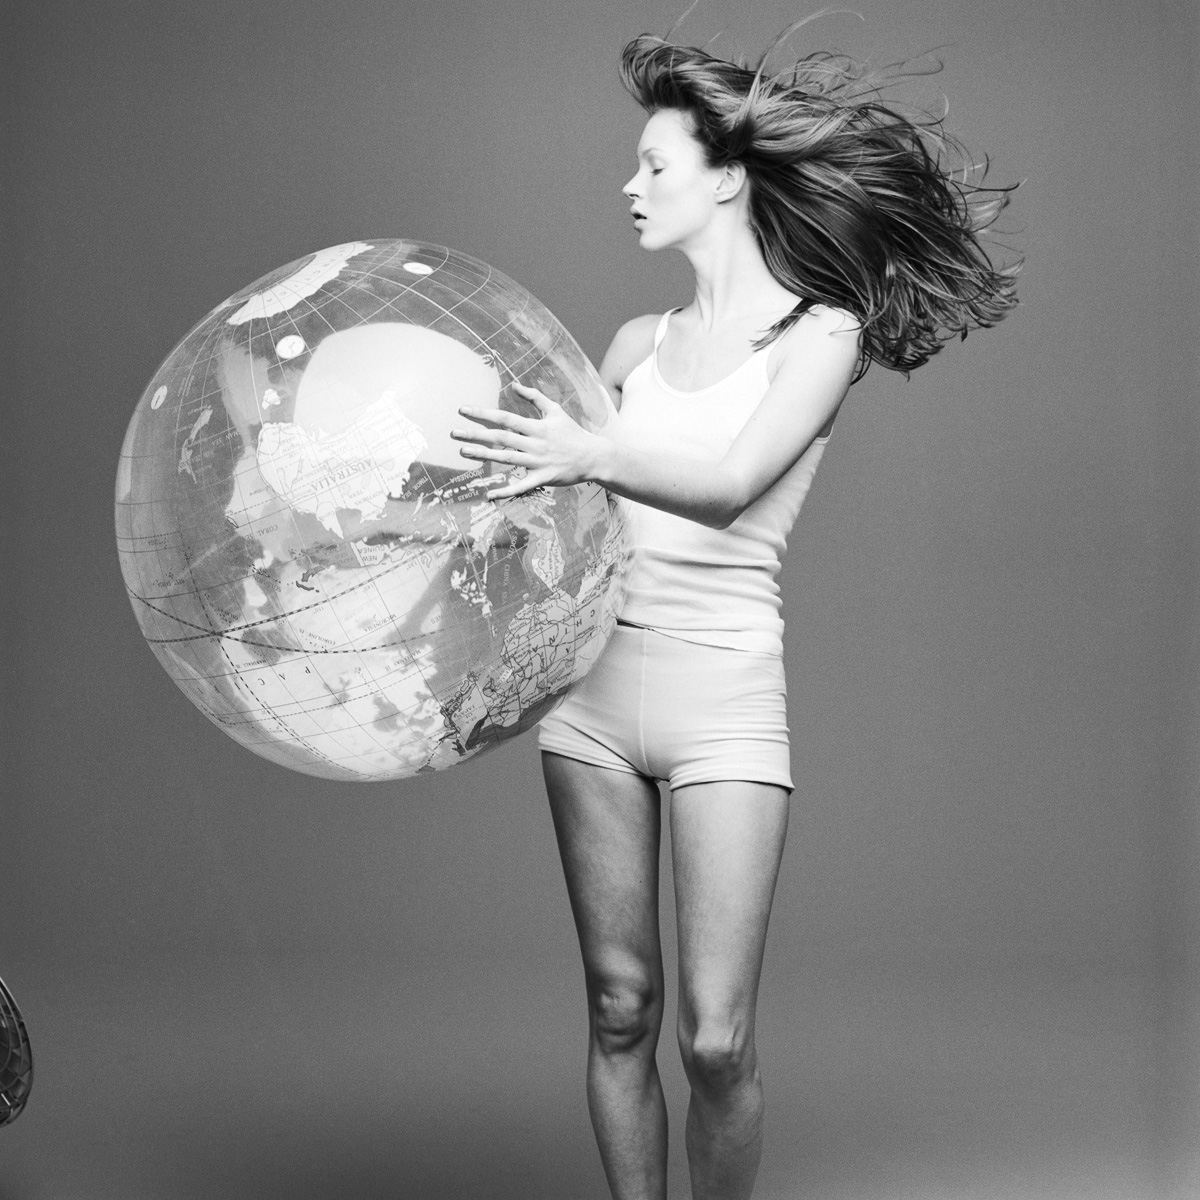 kate+moss+with+the+world+by+patrik+anderssen.jpeg